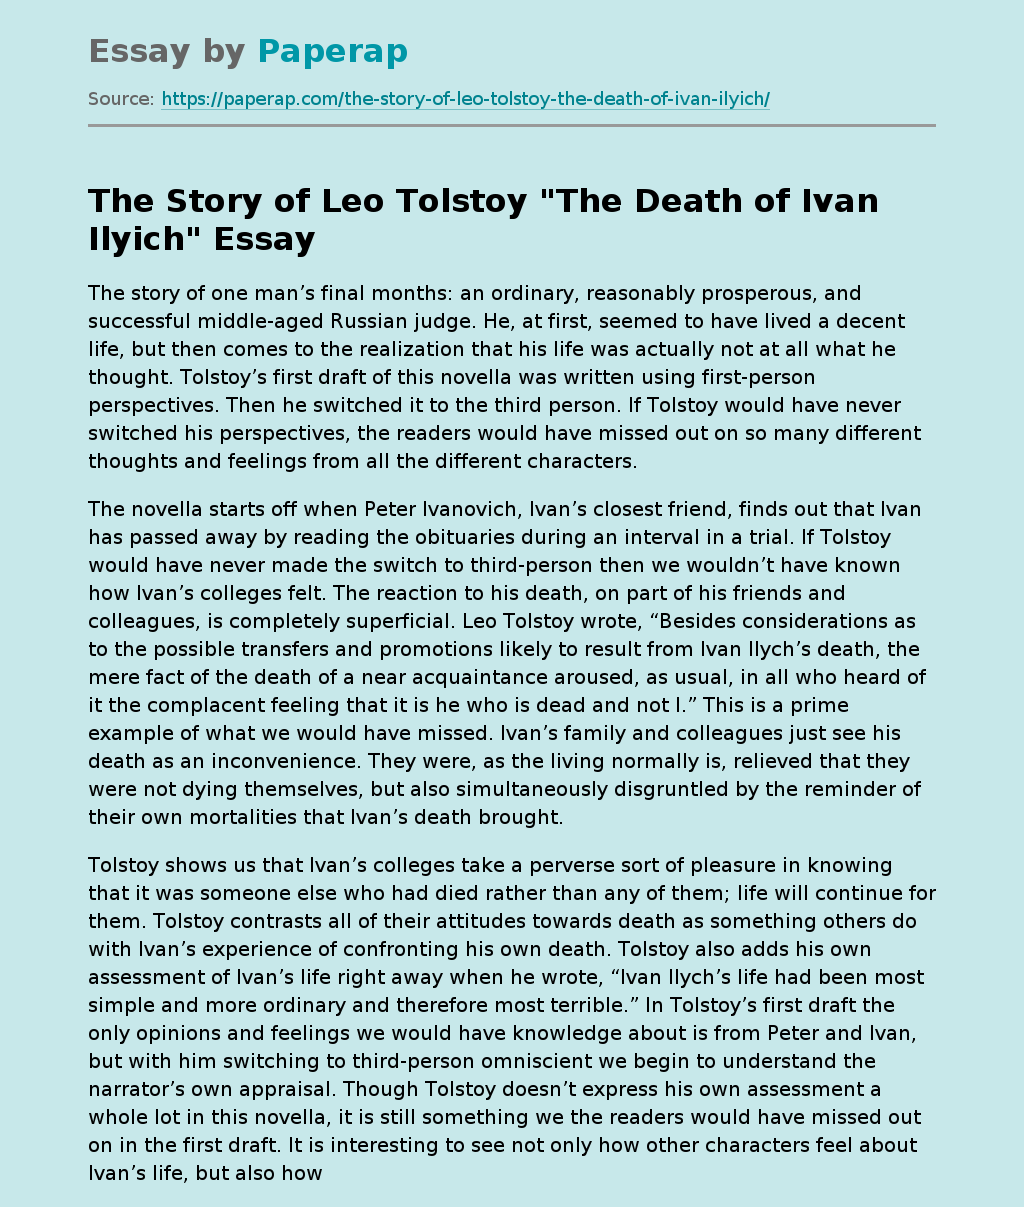 The Story of Leo Tolstoy "The Death of Ivan Ilyich"